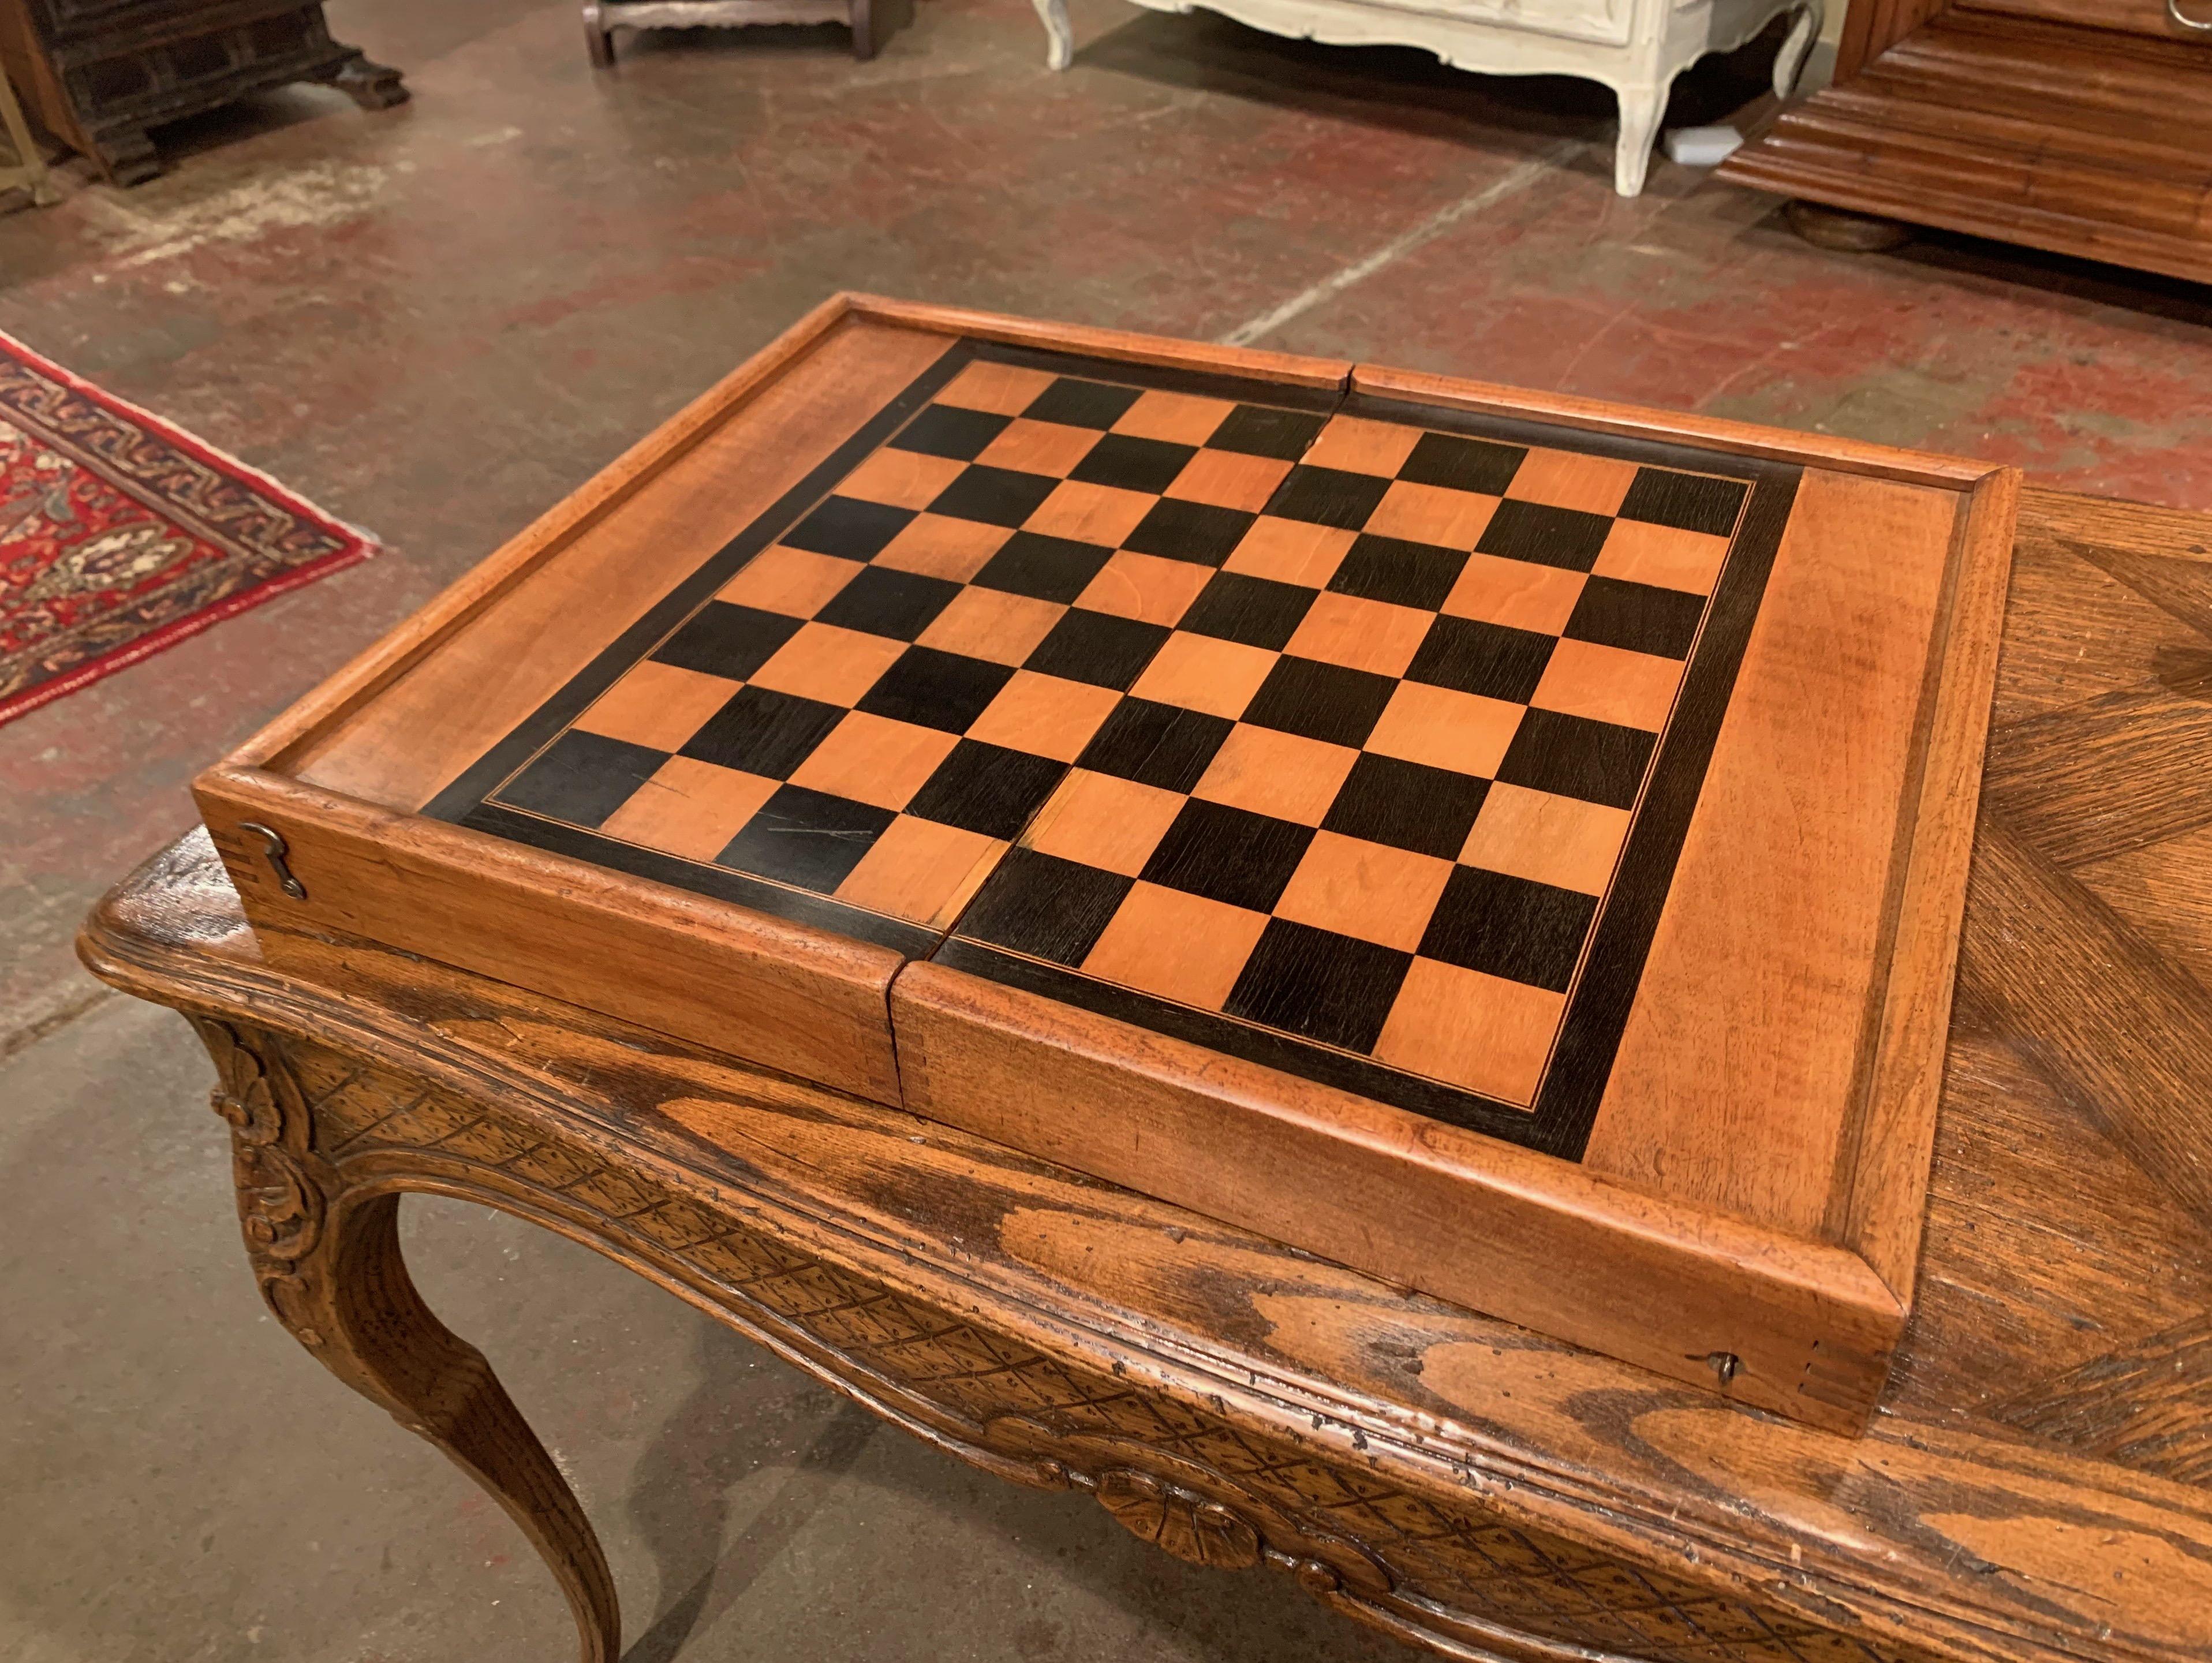 19th Century French Walnut Complete Backgammon or Checkers Board Game 1